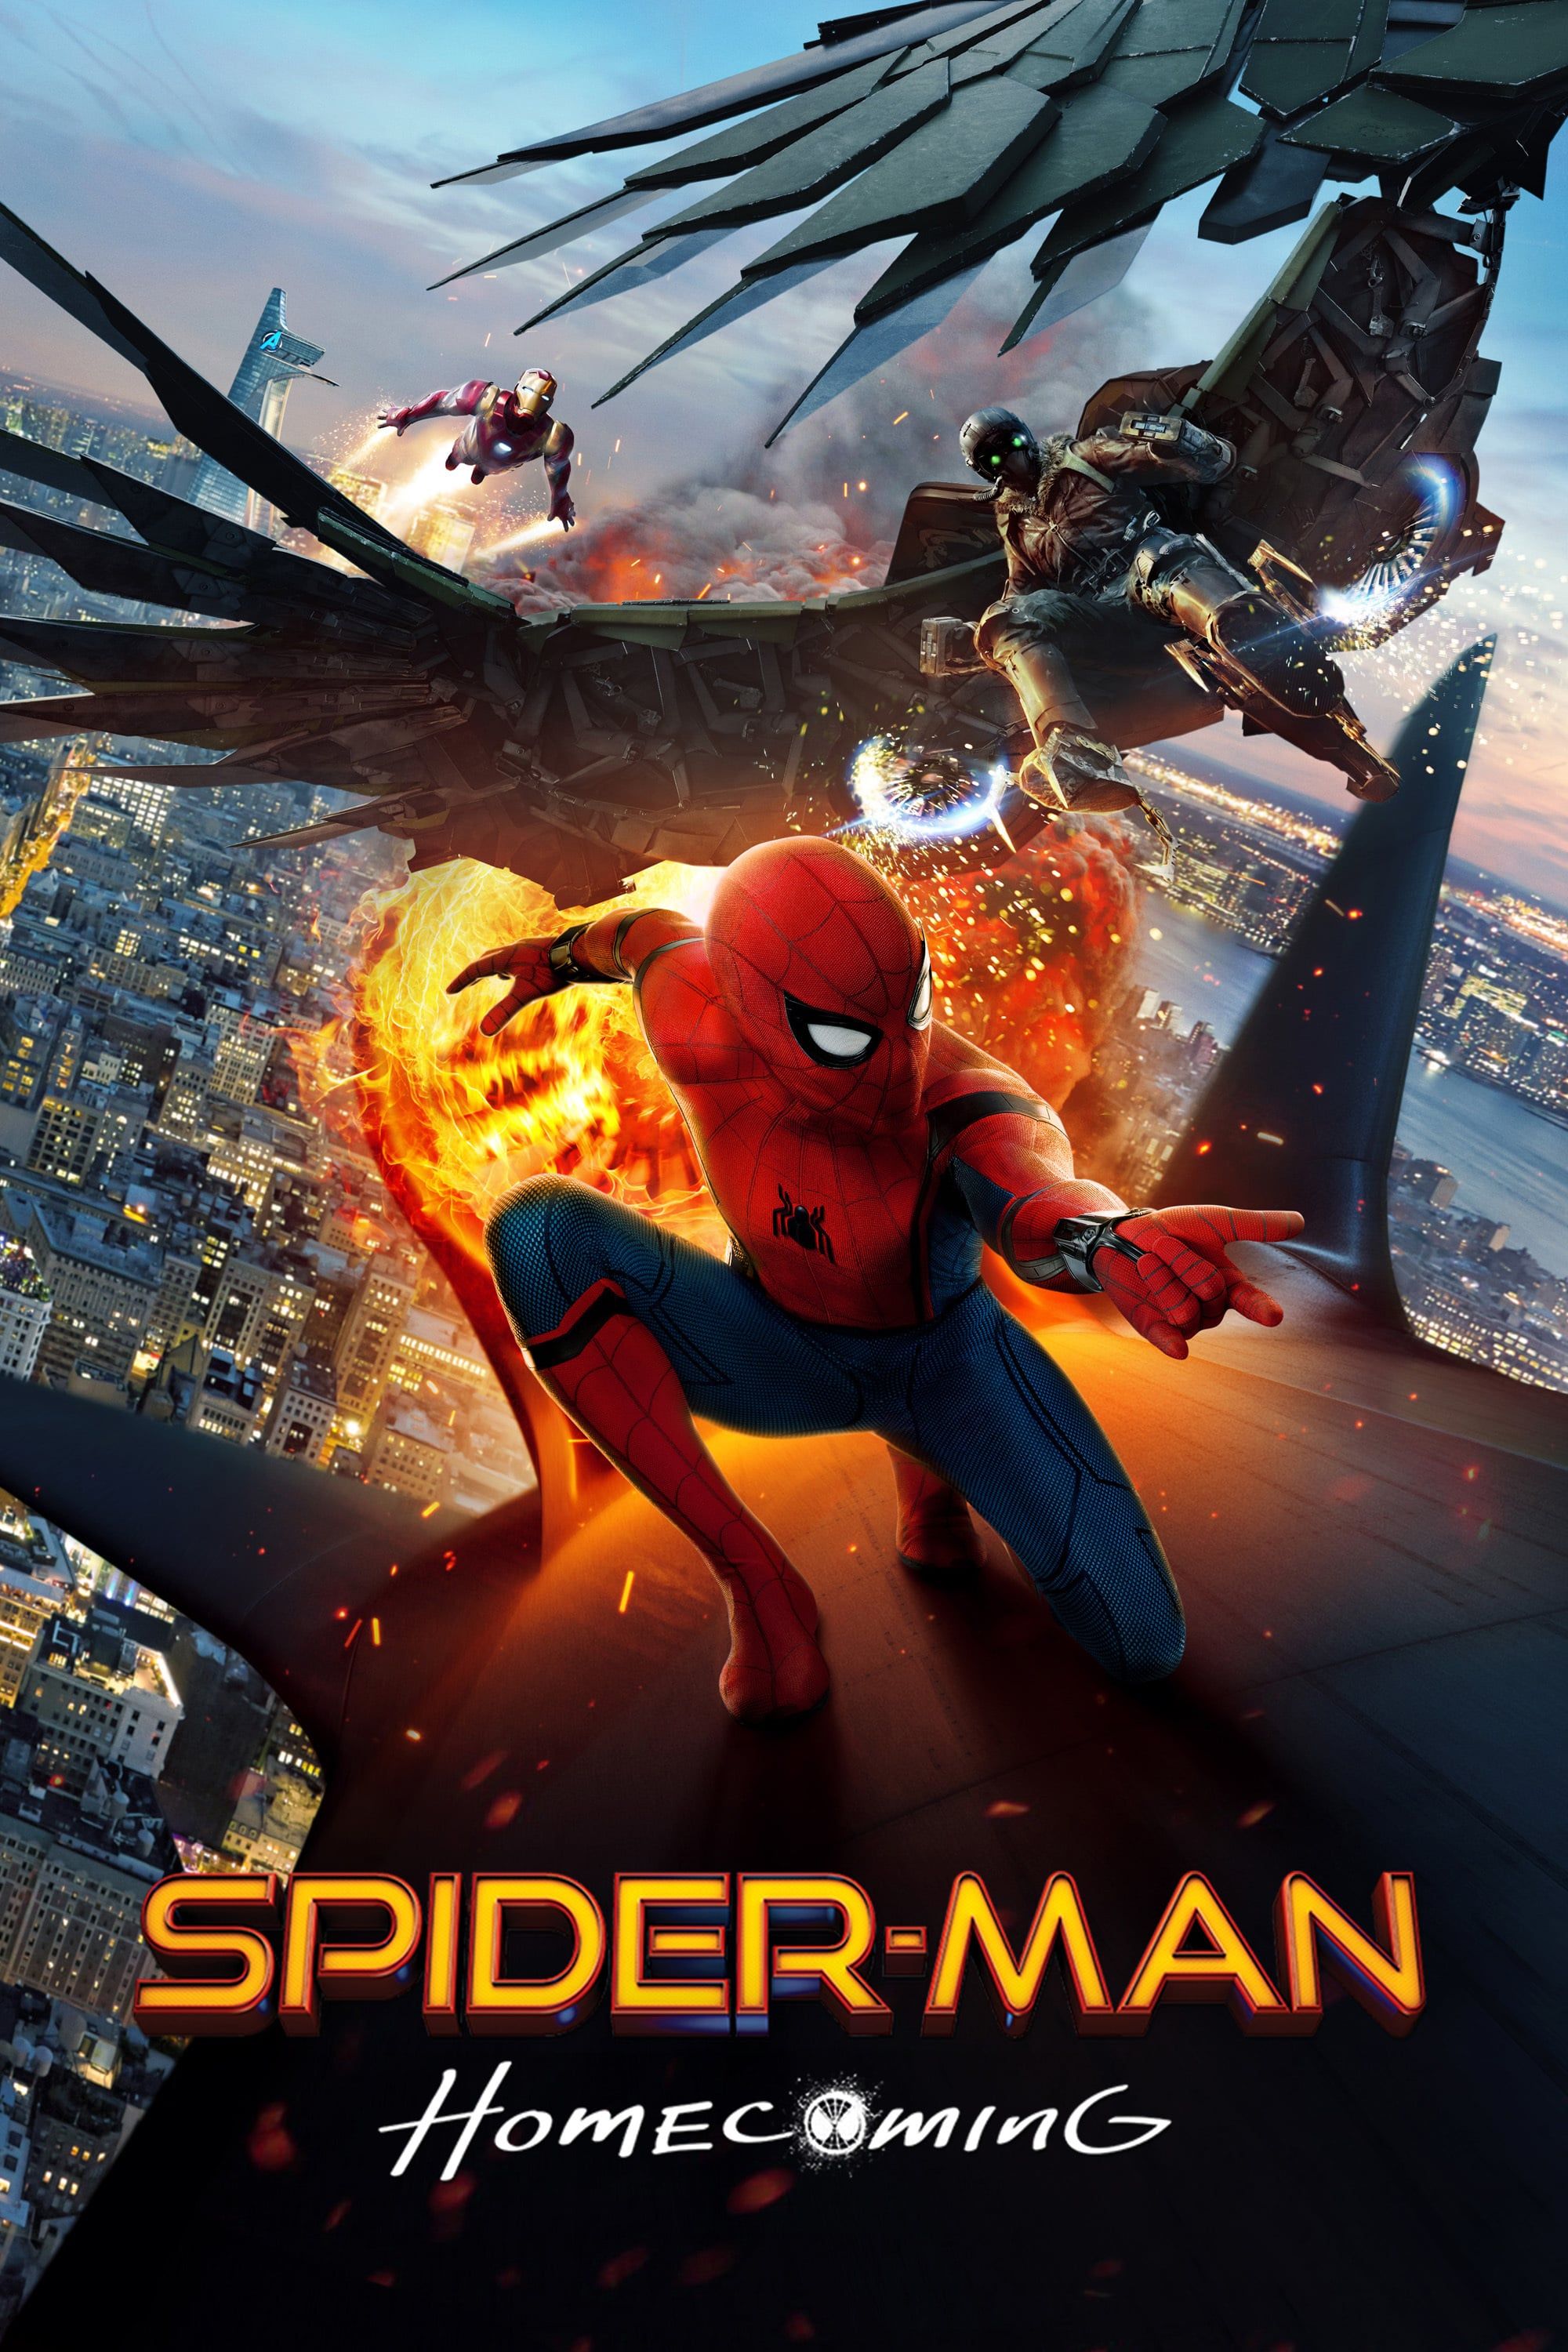 Affiches, posters et images de Spider-Man : Homecoming (2017)